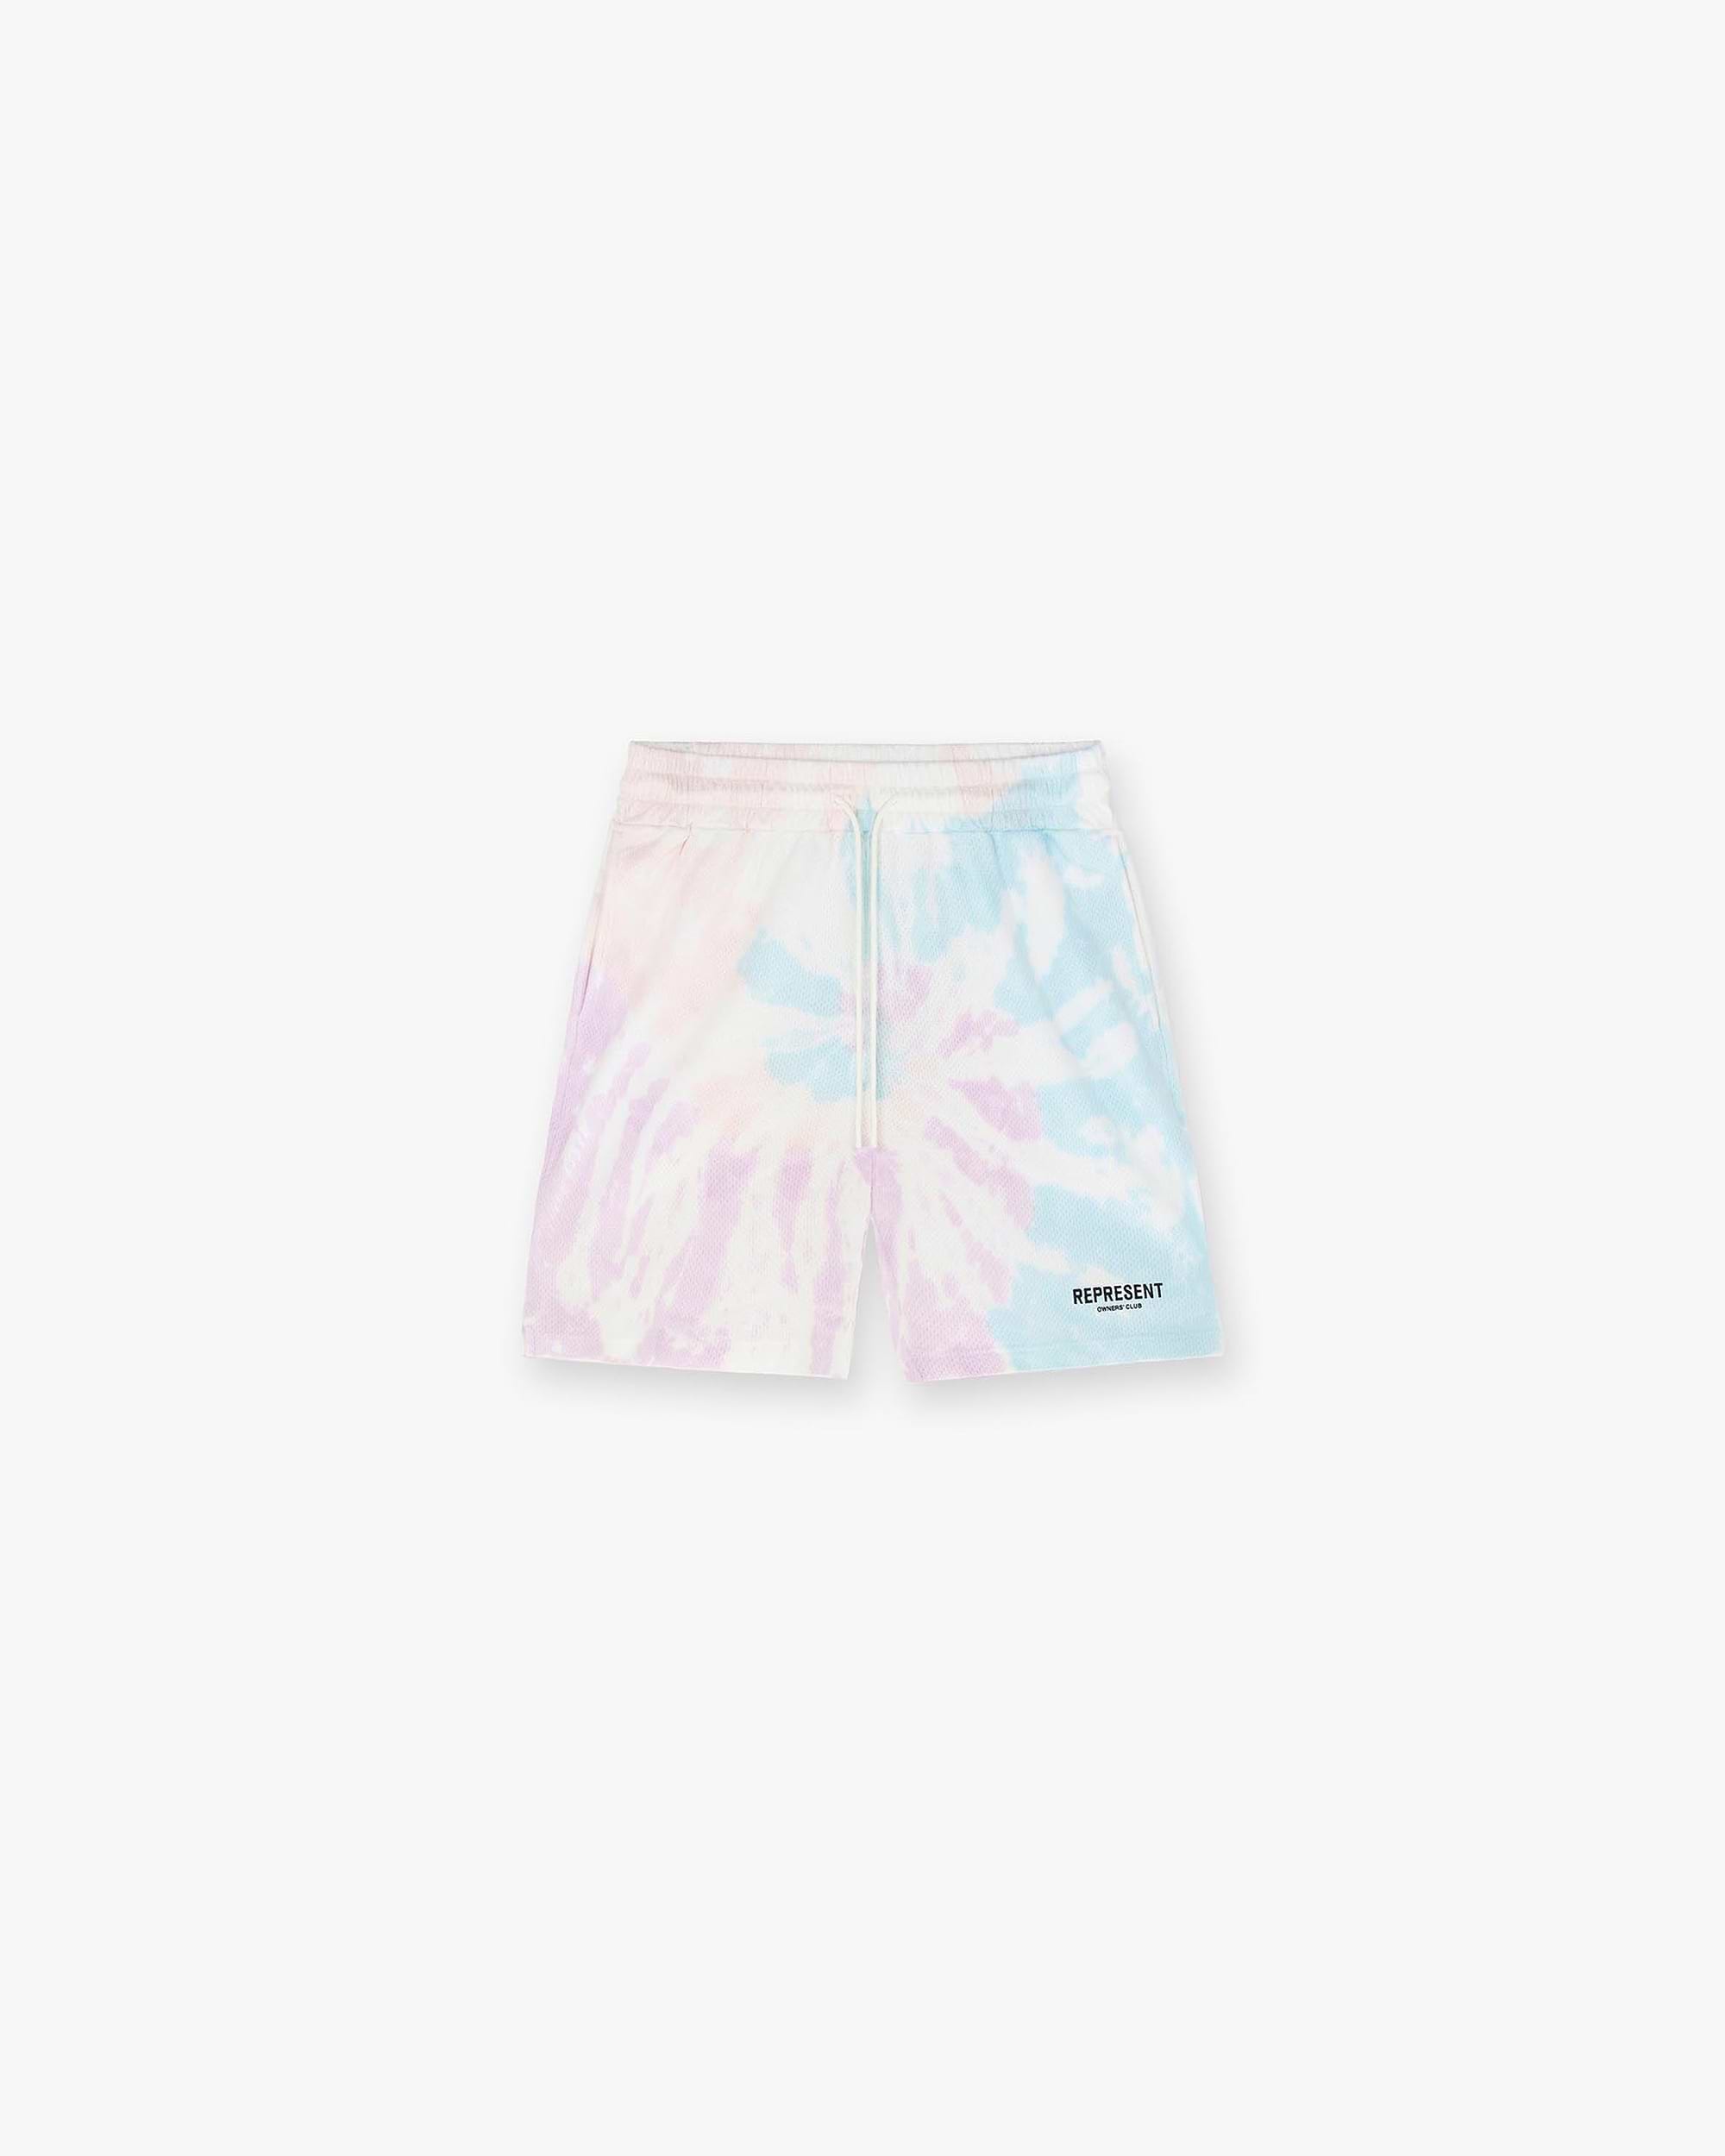 Represent Owners Club Mesh Shorts | Tie Dye Shorts Owners Club | Represent Clo